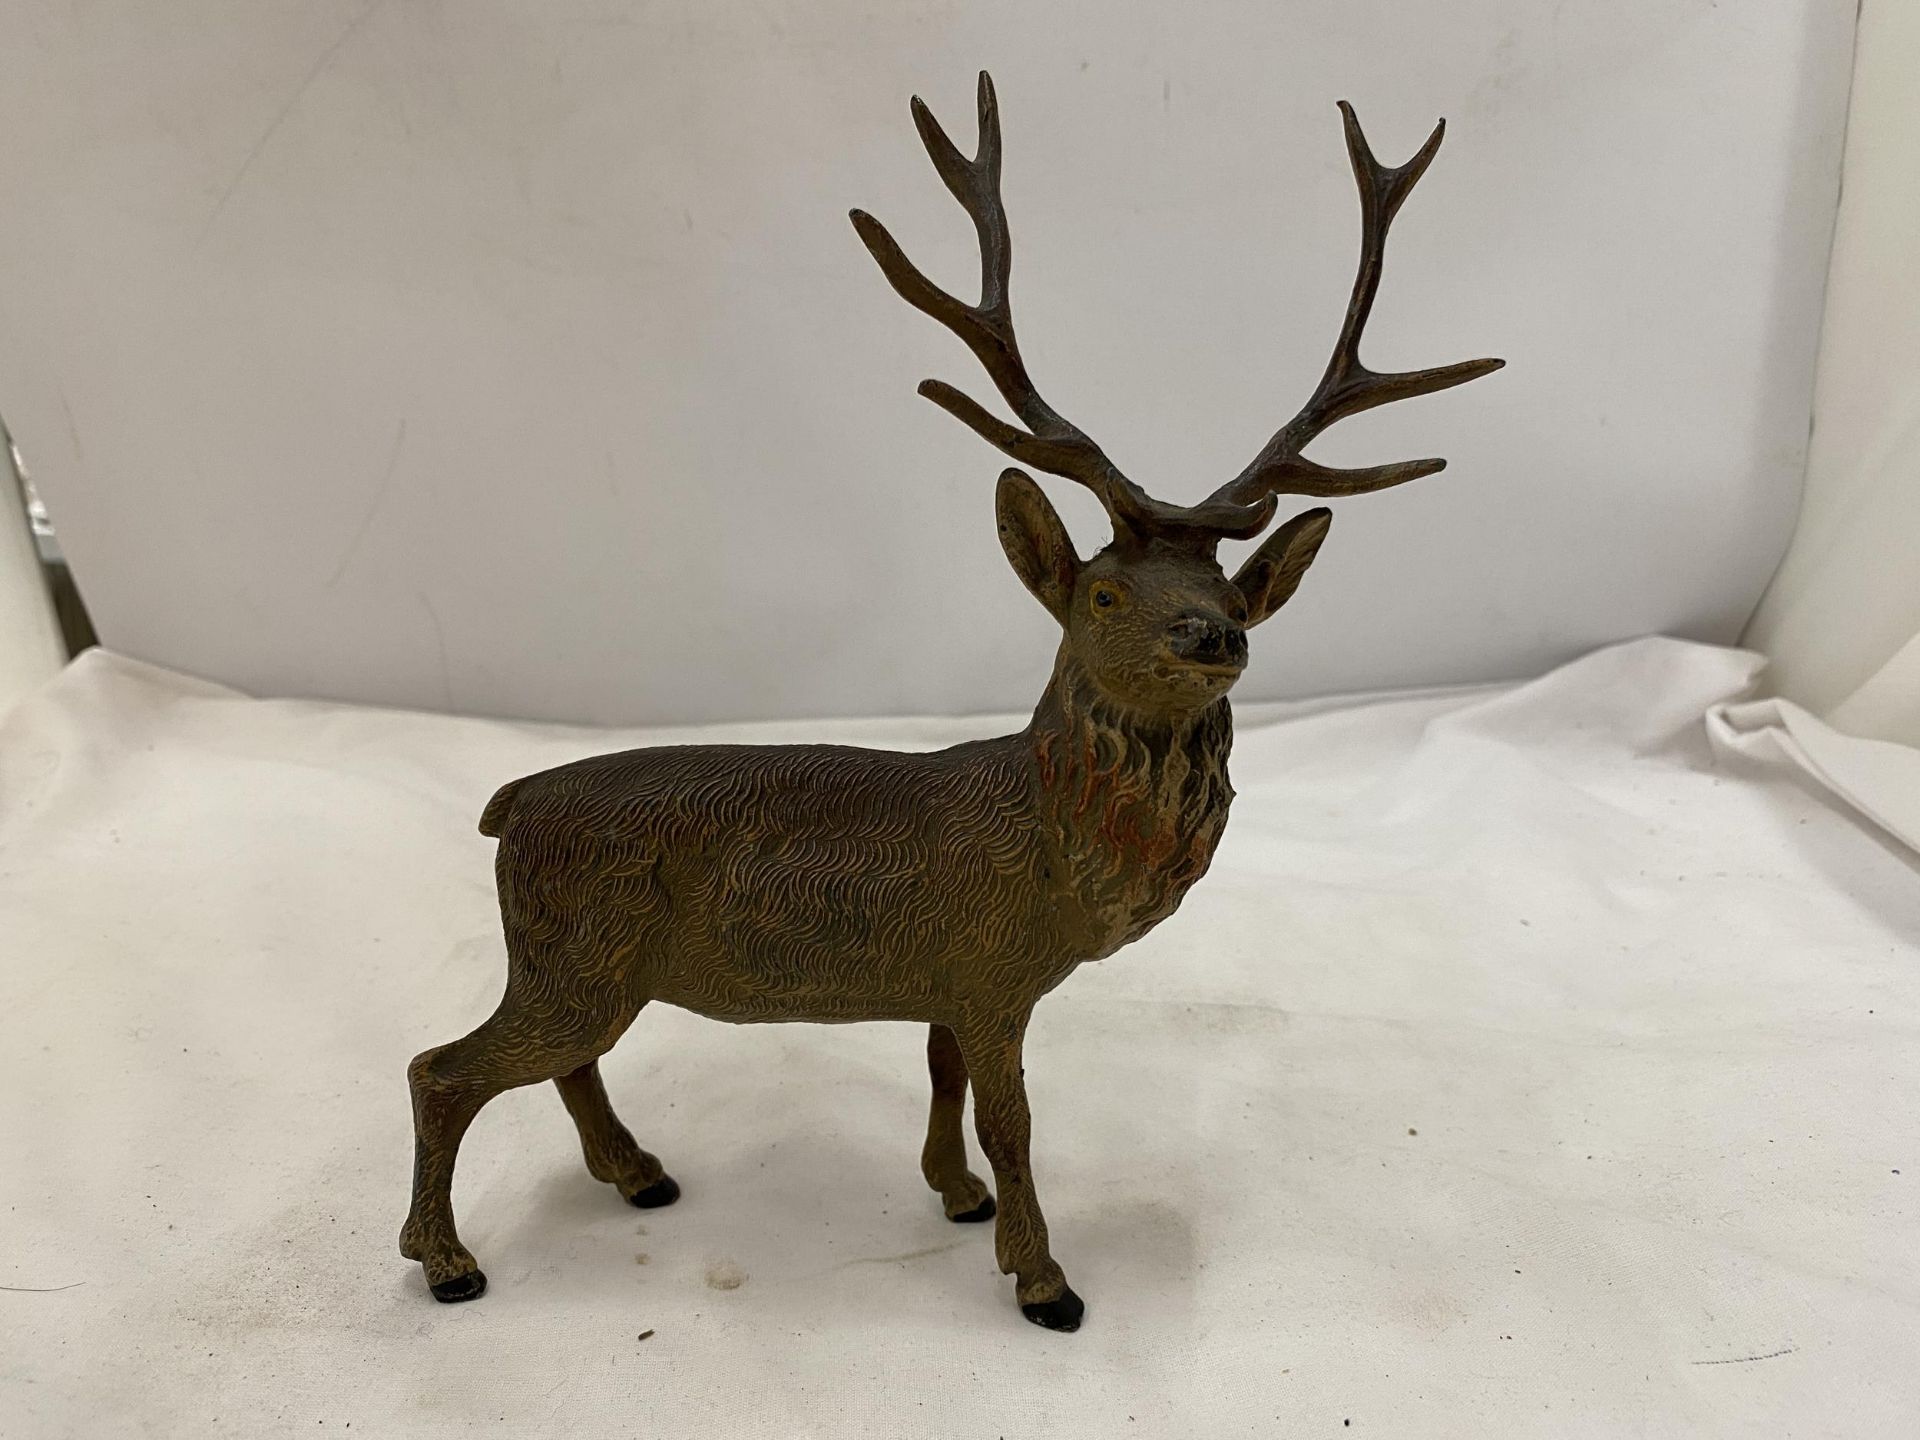 A GOLD PAINTED AUSTRIAN STAG FIGURE